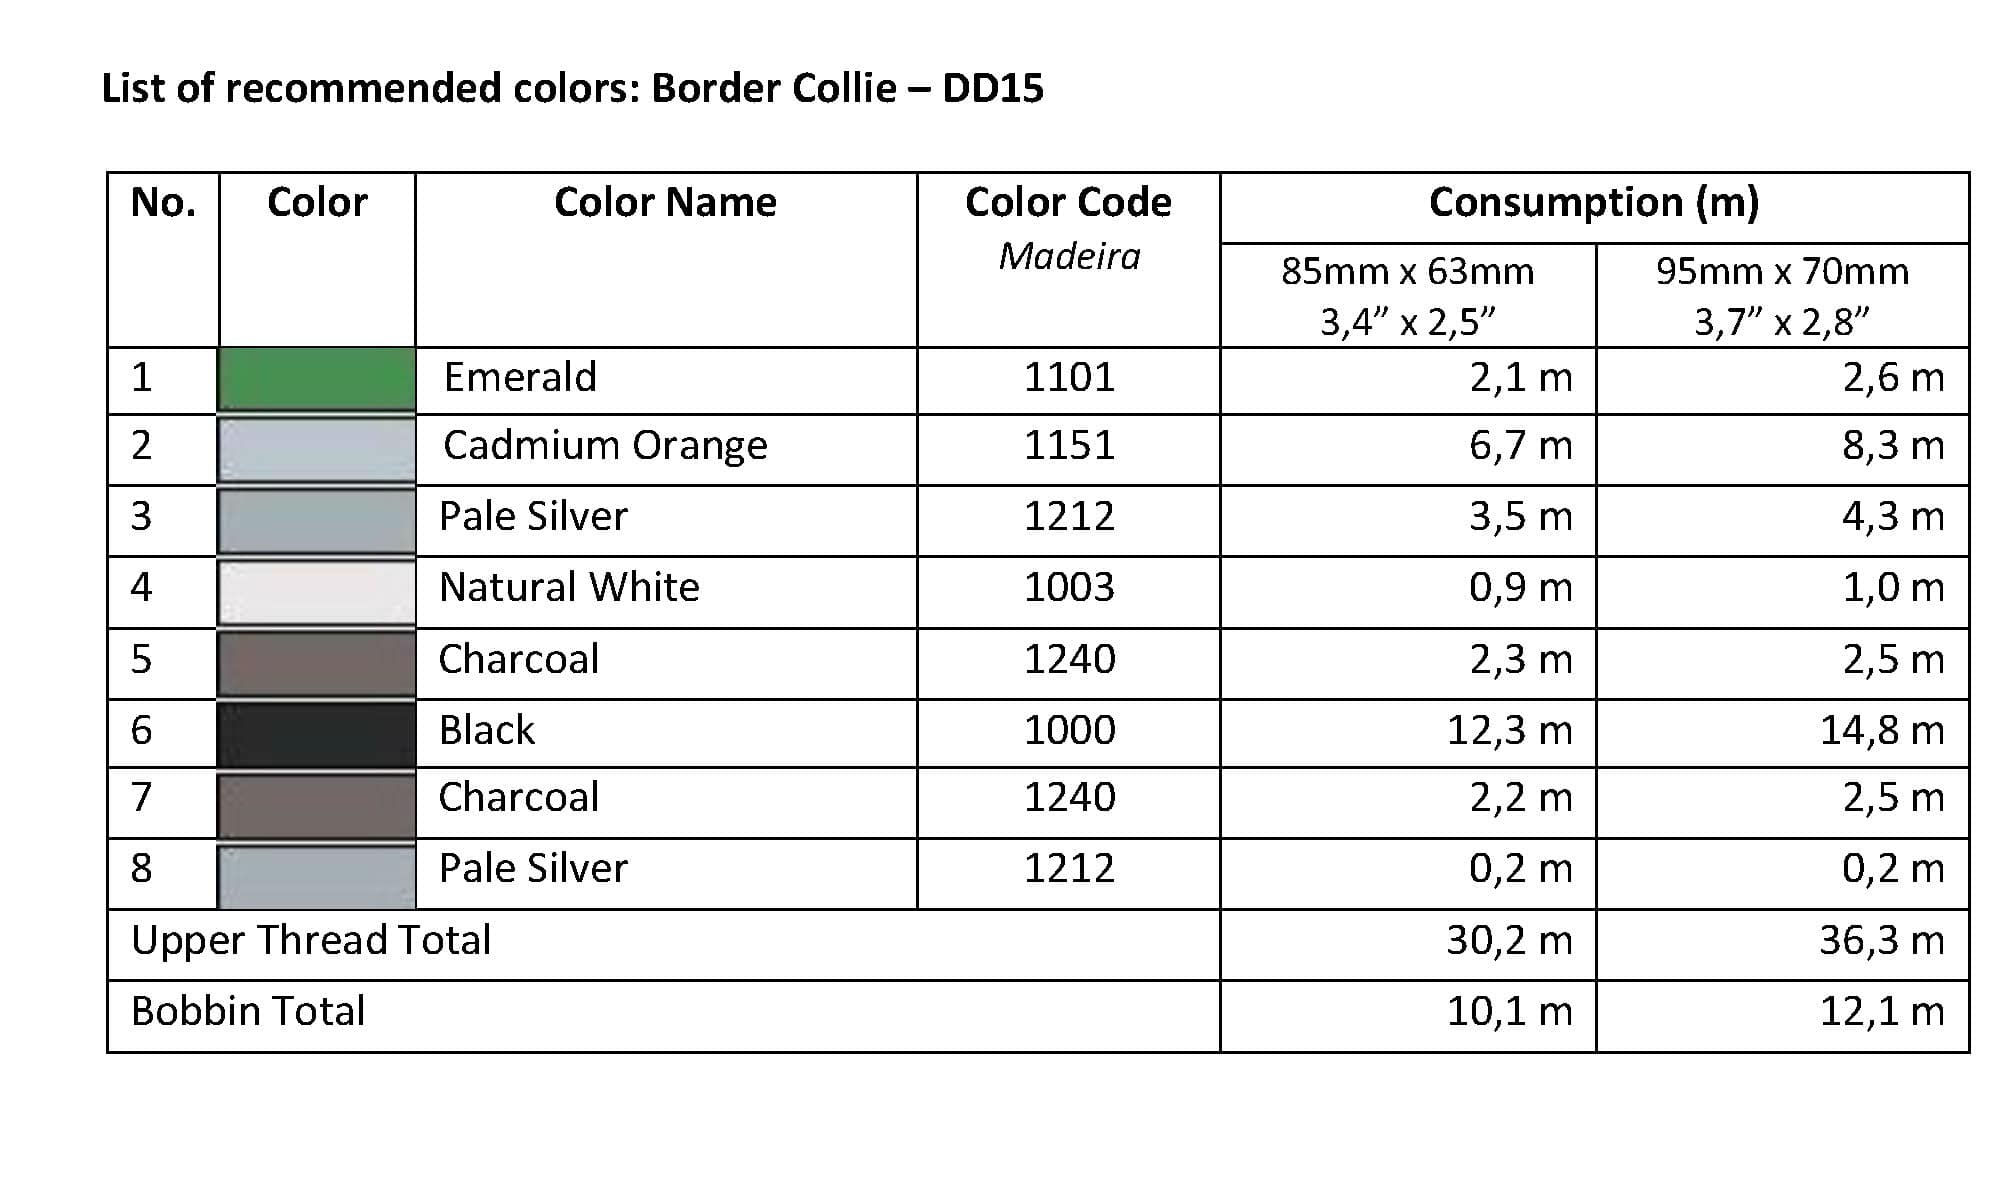 List of Recommended Colors - Border Collie DD15